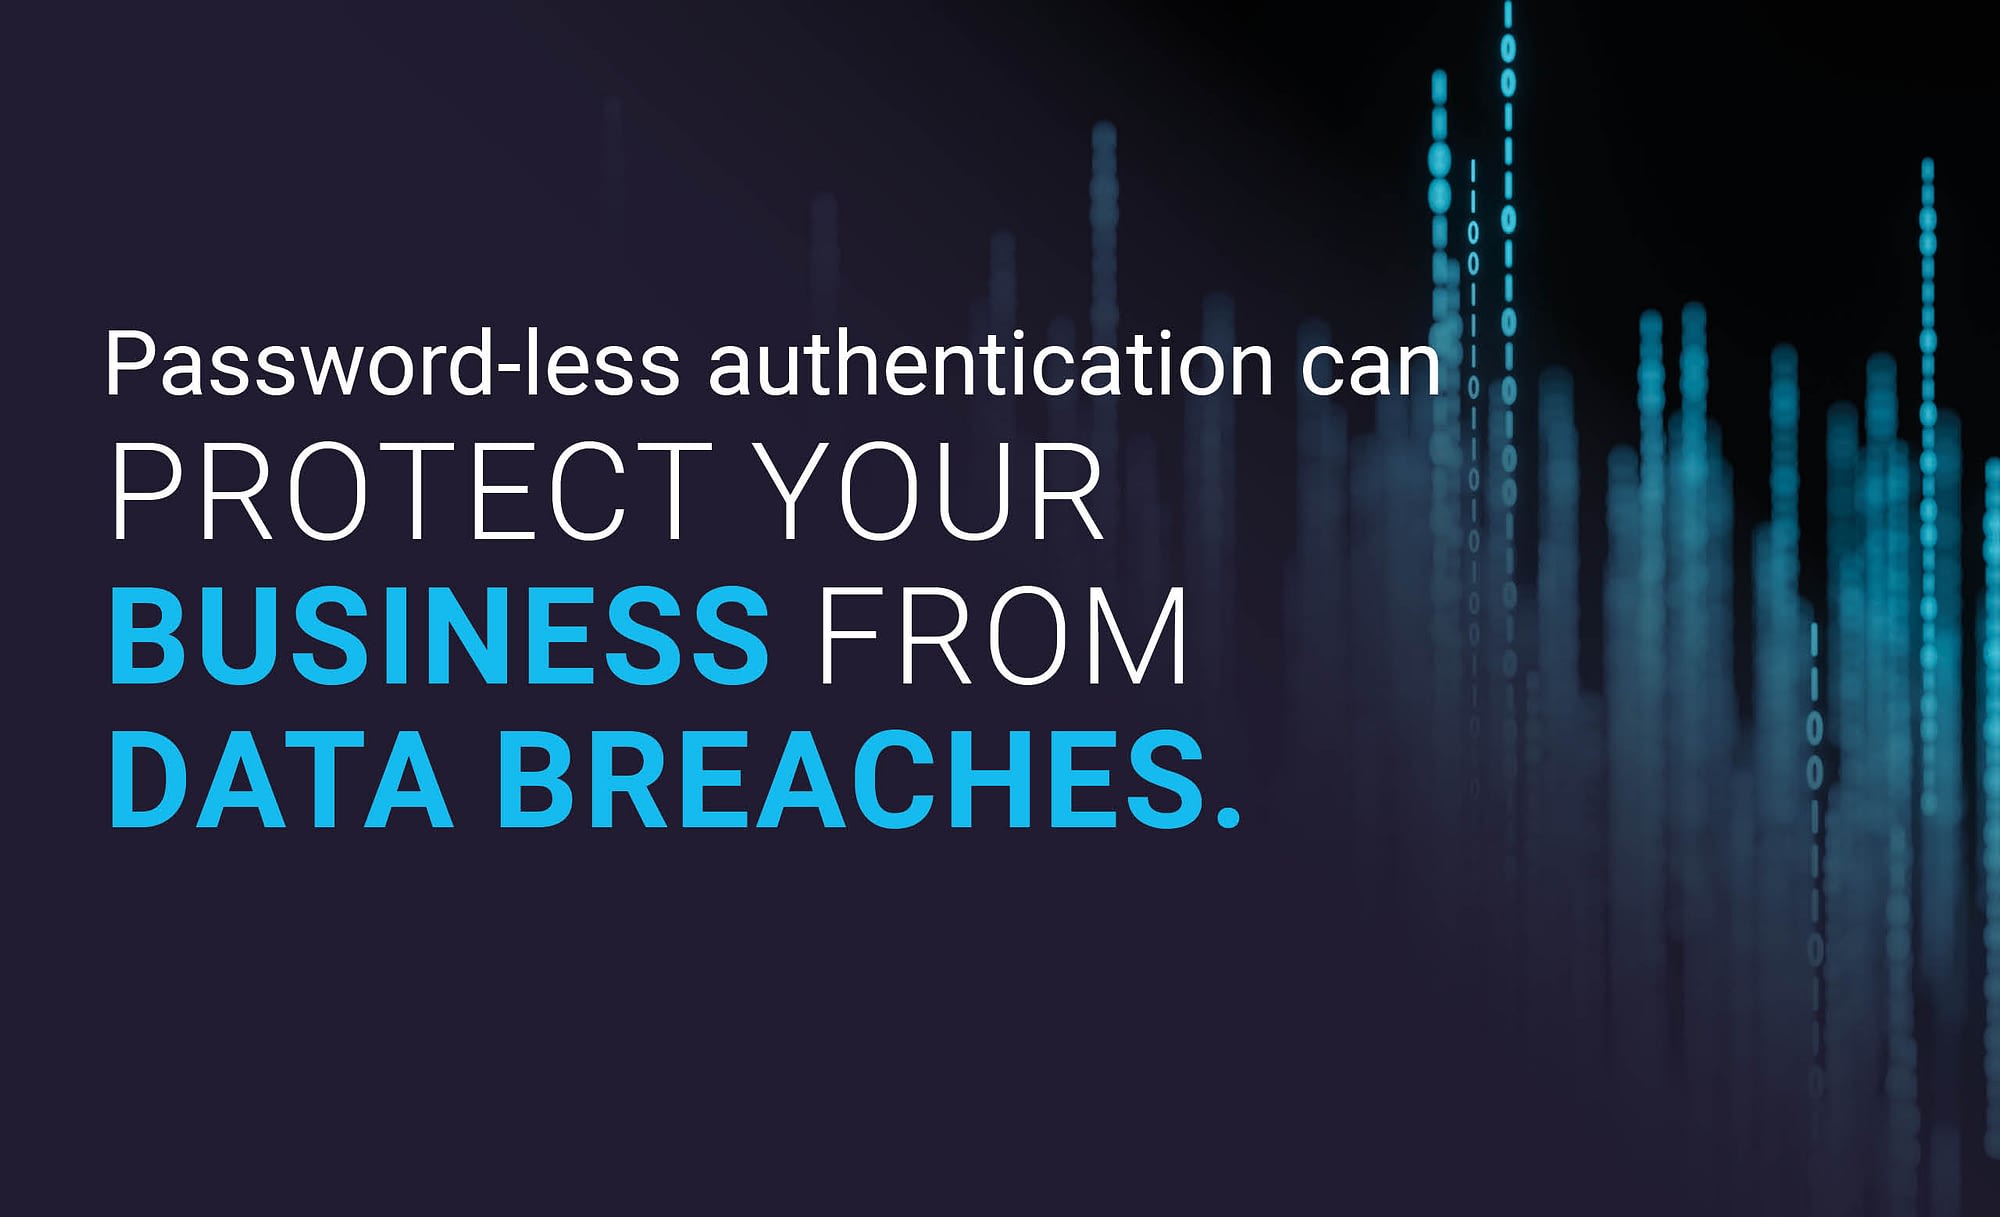 Could password-less authentication protect you and your business from data breaches?